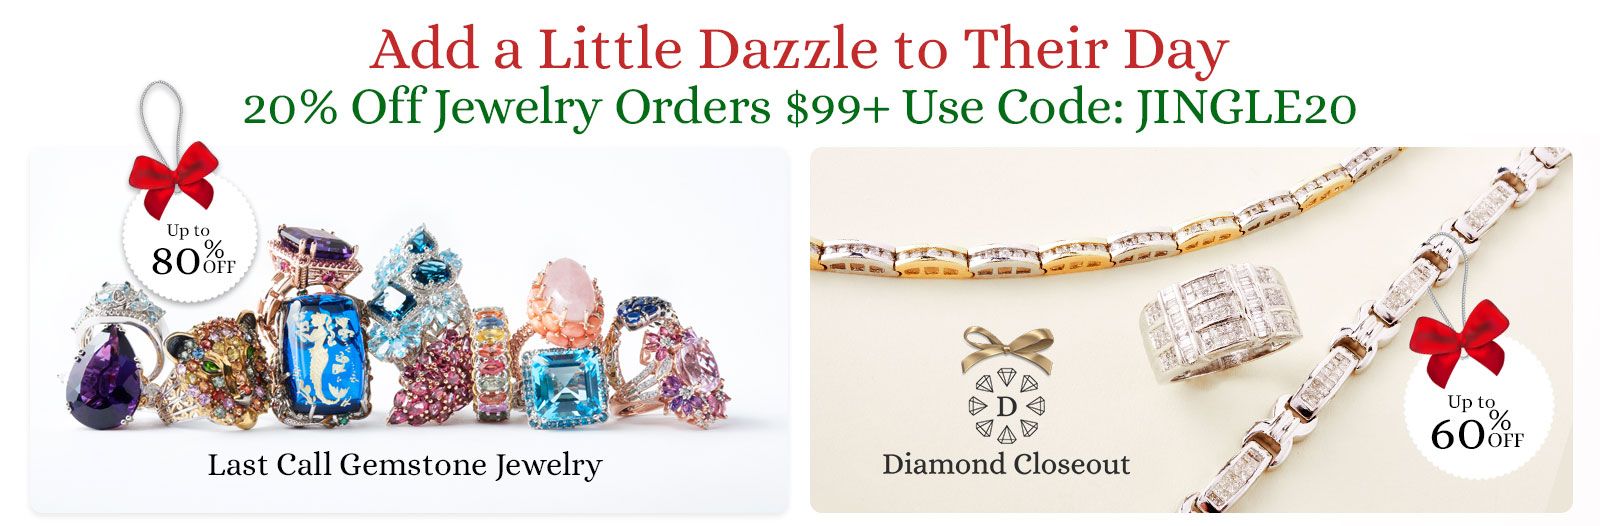 Add a Little Dazzle to Their Day  | 20% Off Jewelry Orders $99+ Use Code: JINGLE20